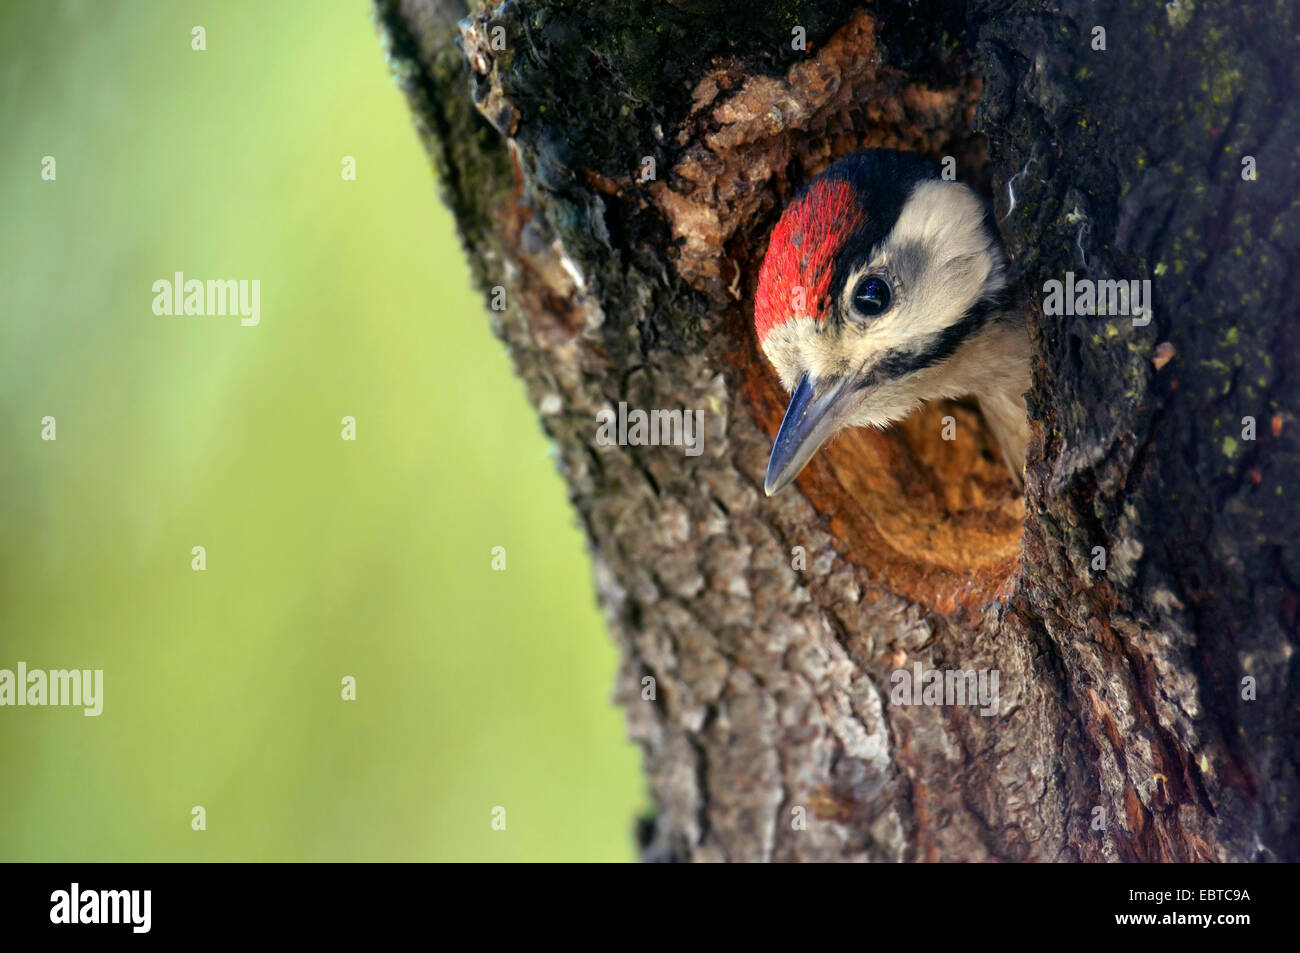 syrian woodpecker (Picoides syriacus, Dendrocopos syracus), squaeker looking out of its den, Hungary, Fejer, Cece Stock Photo